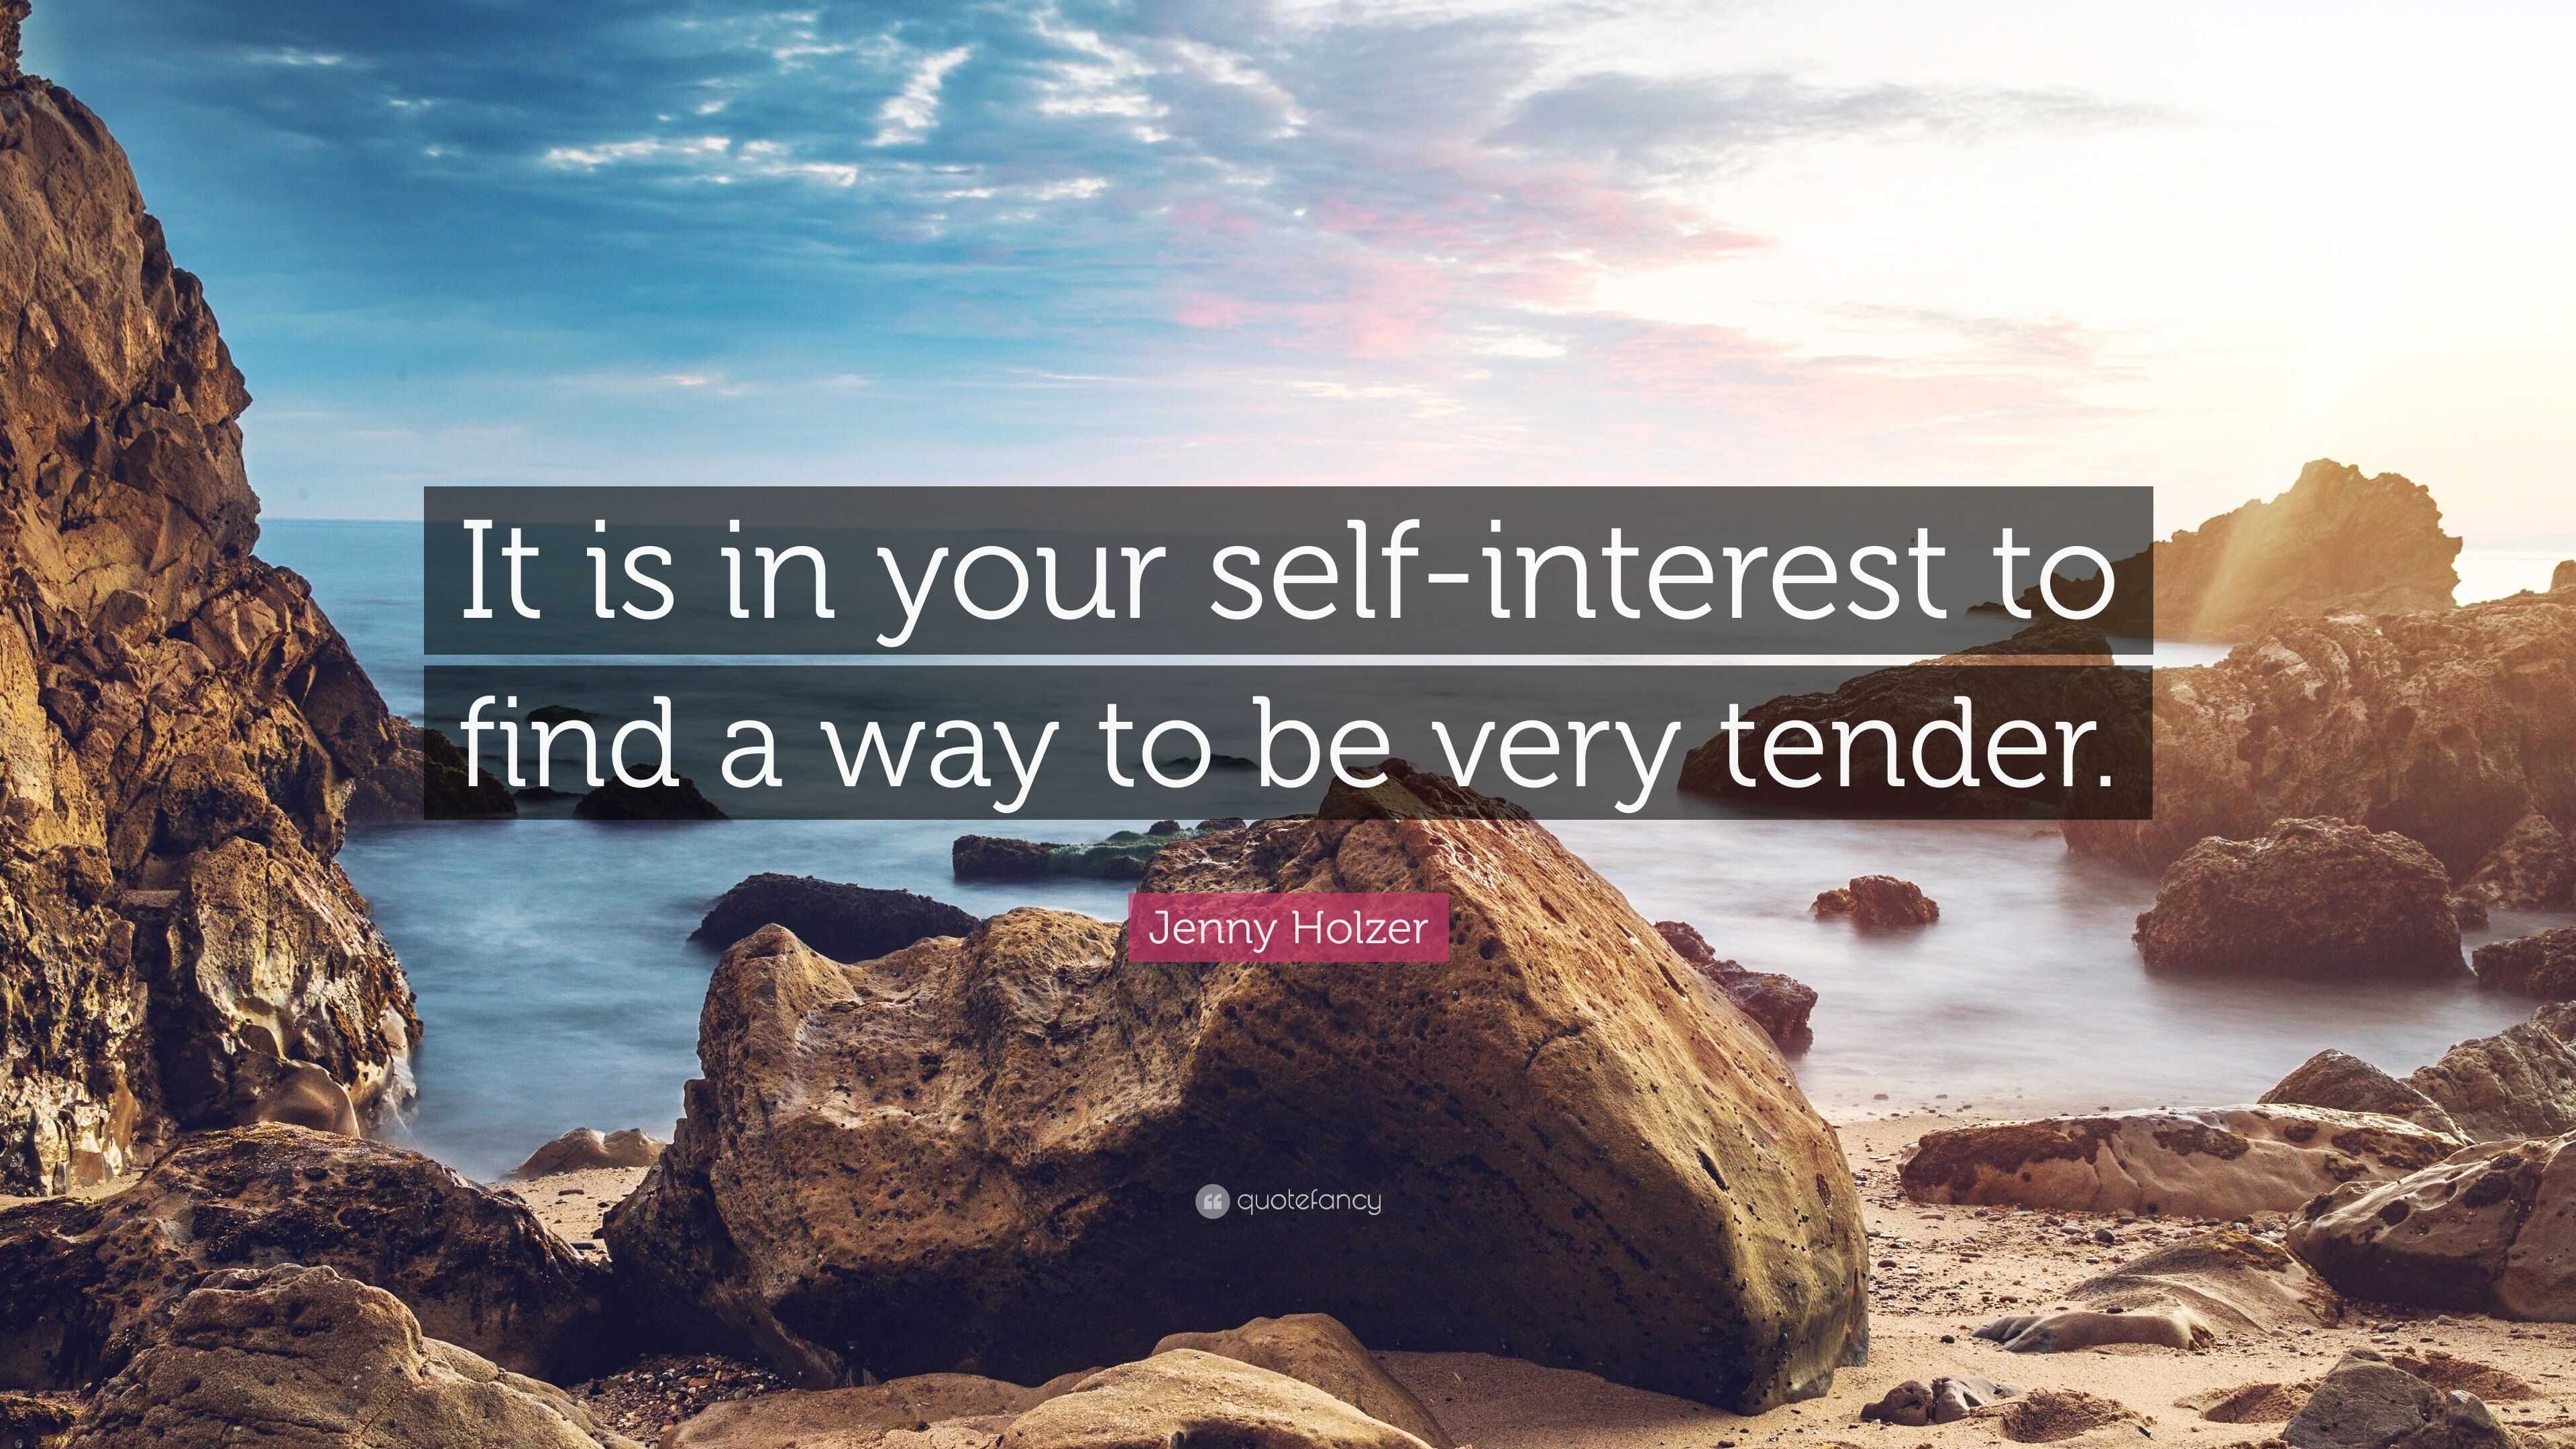 Jenny Holzer Quote “it Is In Your Self Interest To Find A Way To Be